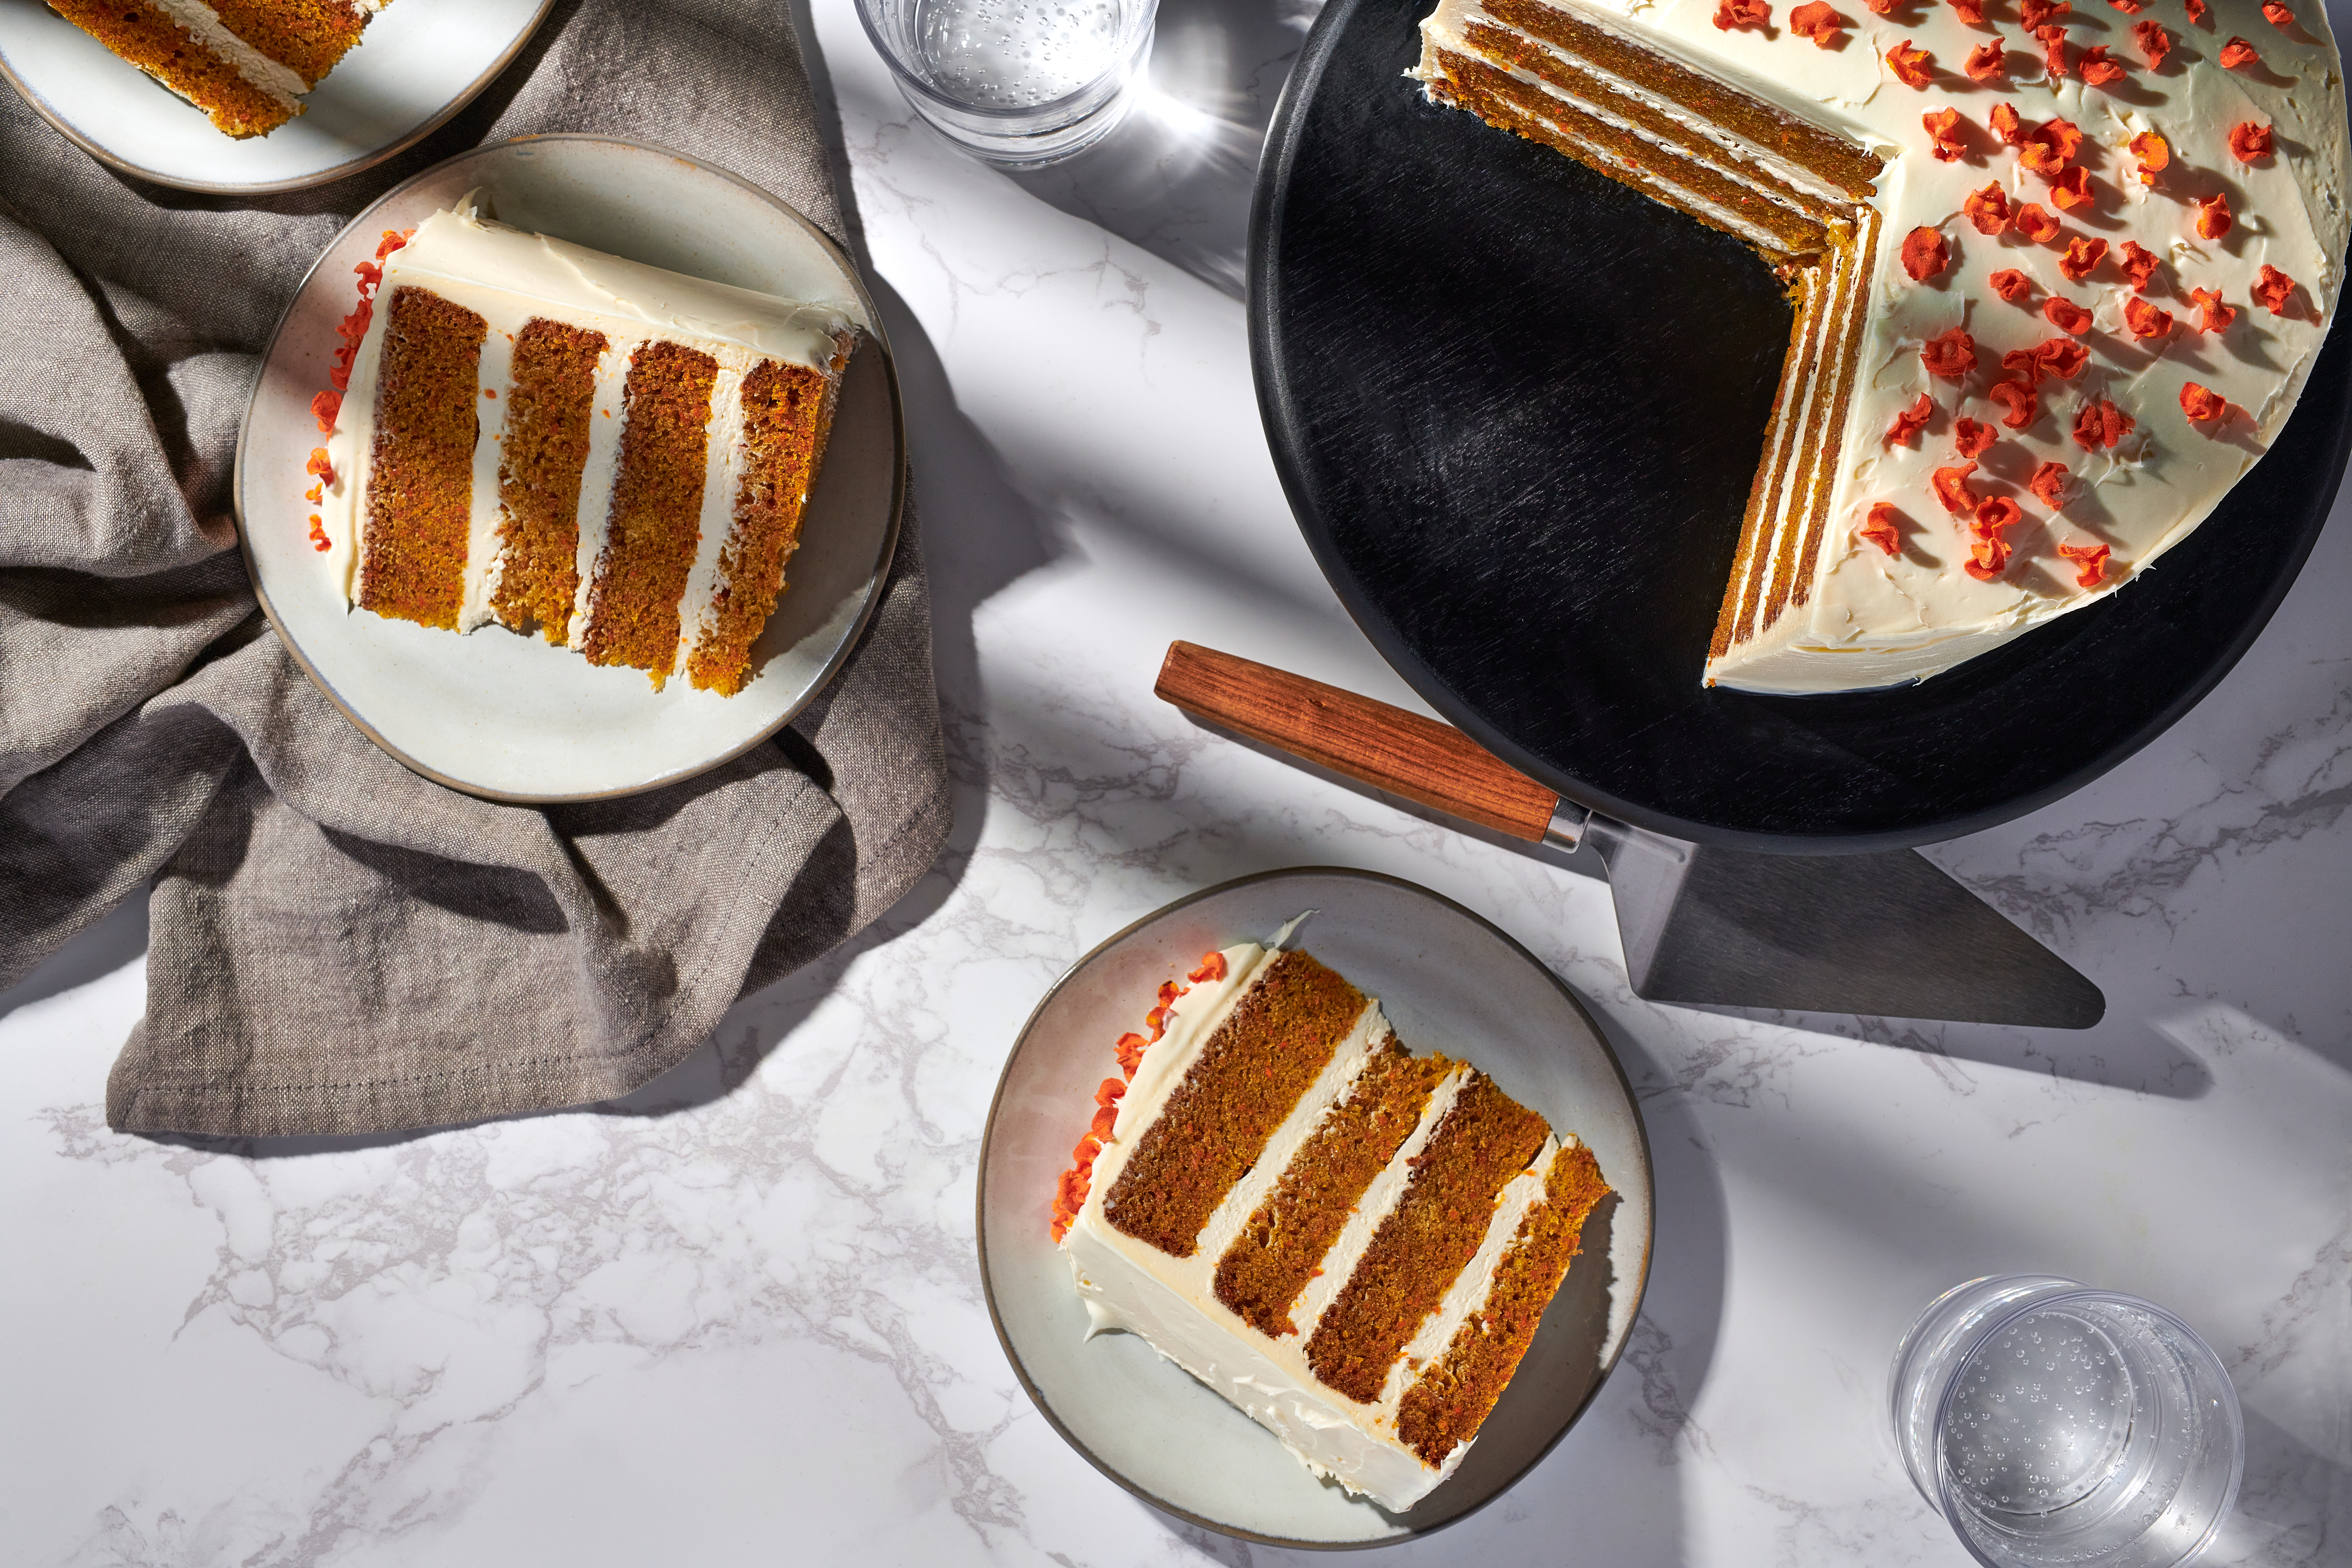 Two big slices of carrot cake are plated next to the rest of the cake. 